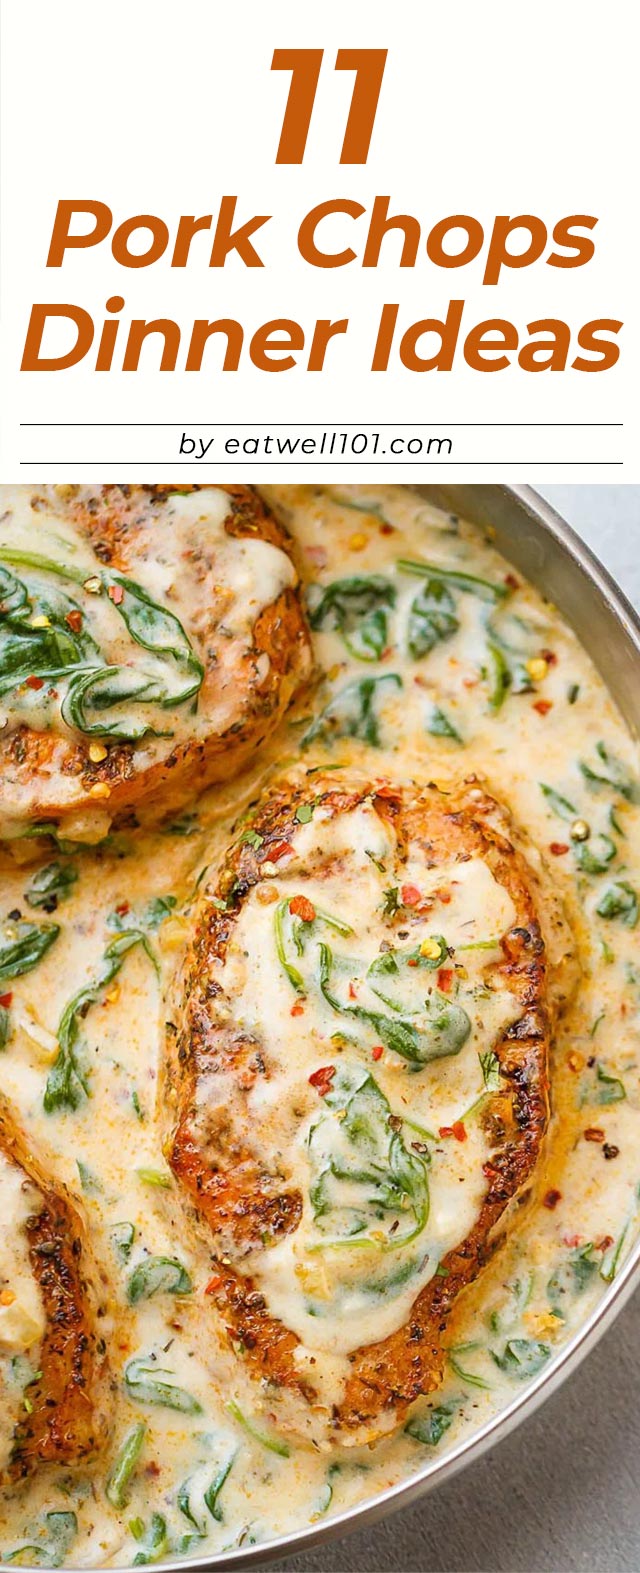 11 Best Pork Chop Recipes Ideas - #recipes #porkchops #eatwell101 - These are simply the best pork chop recipes you'll ever make - enjoy!